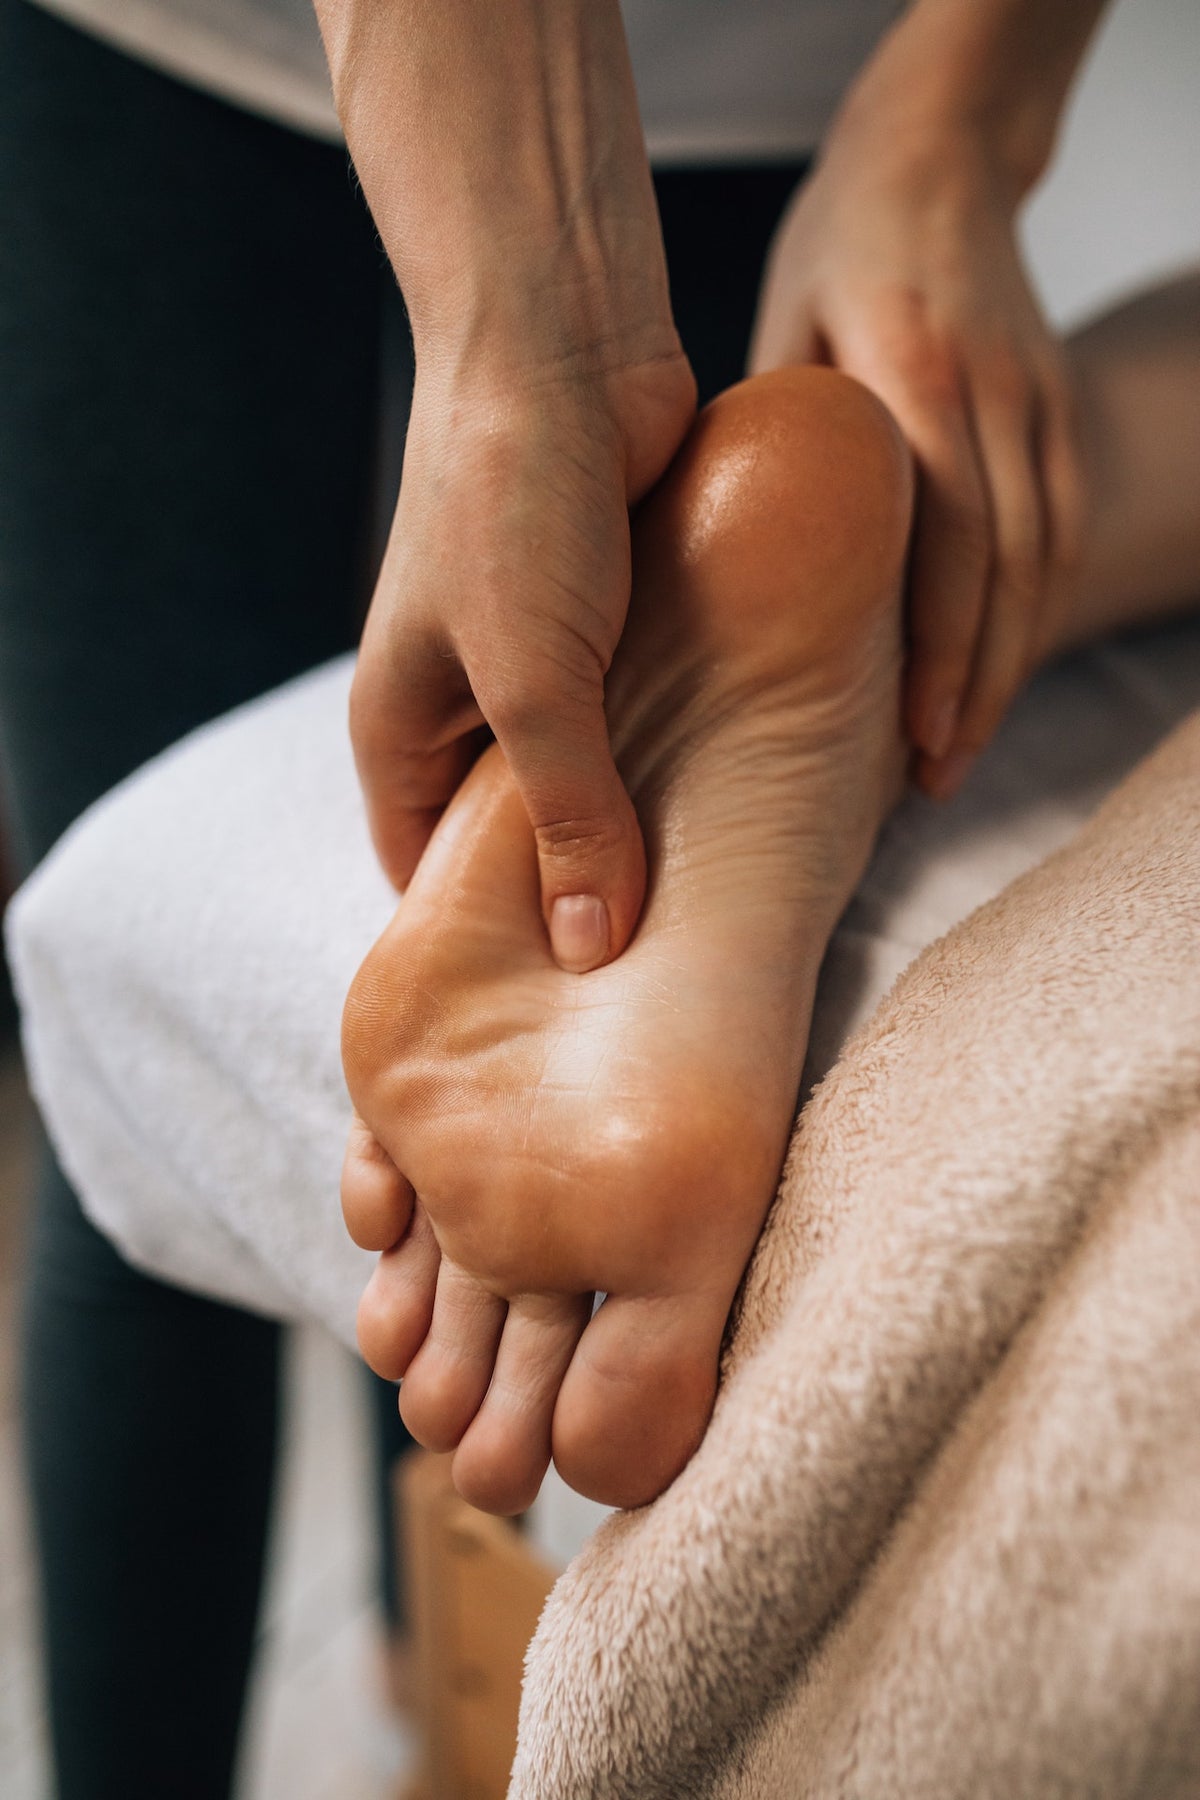 What Causes Foot Cramps?: 9 Possible Causes